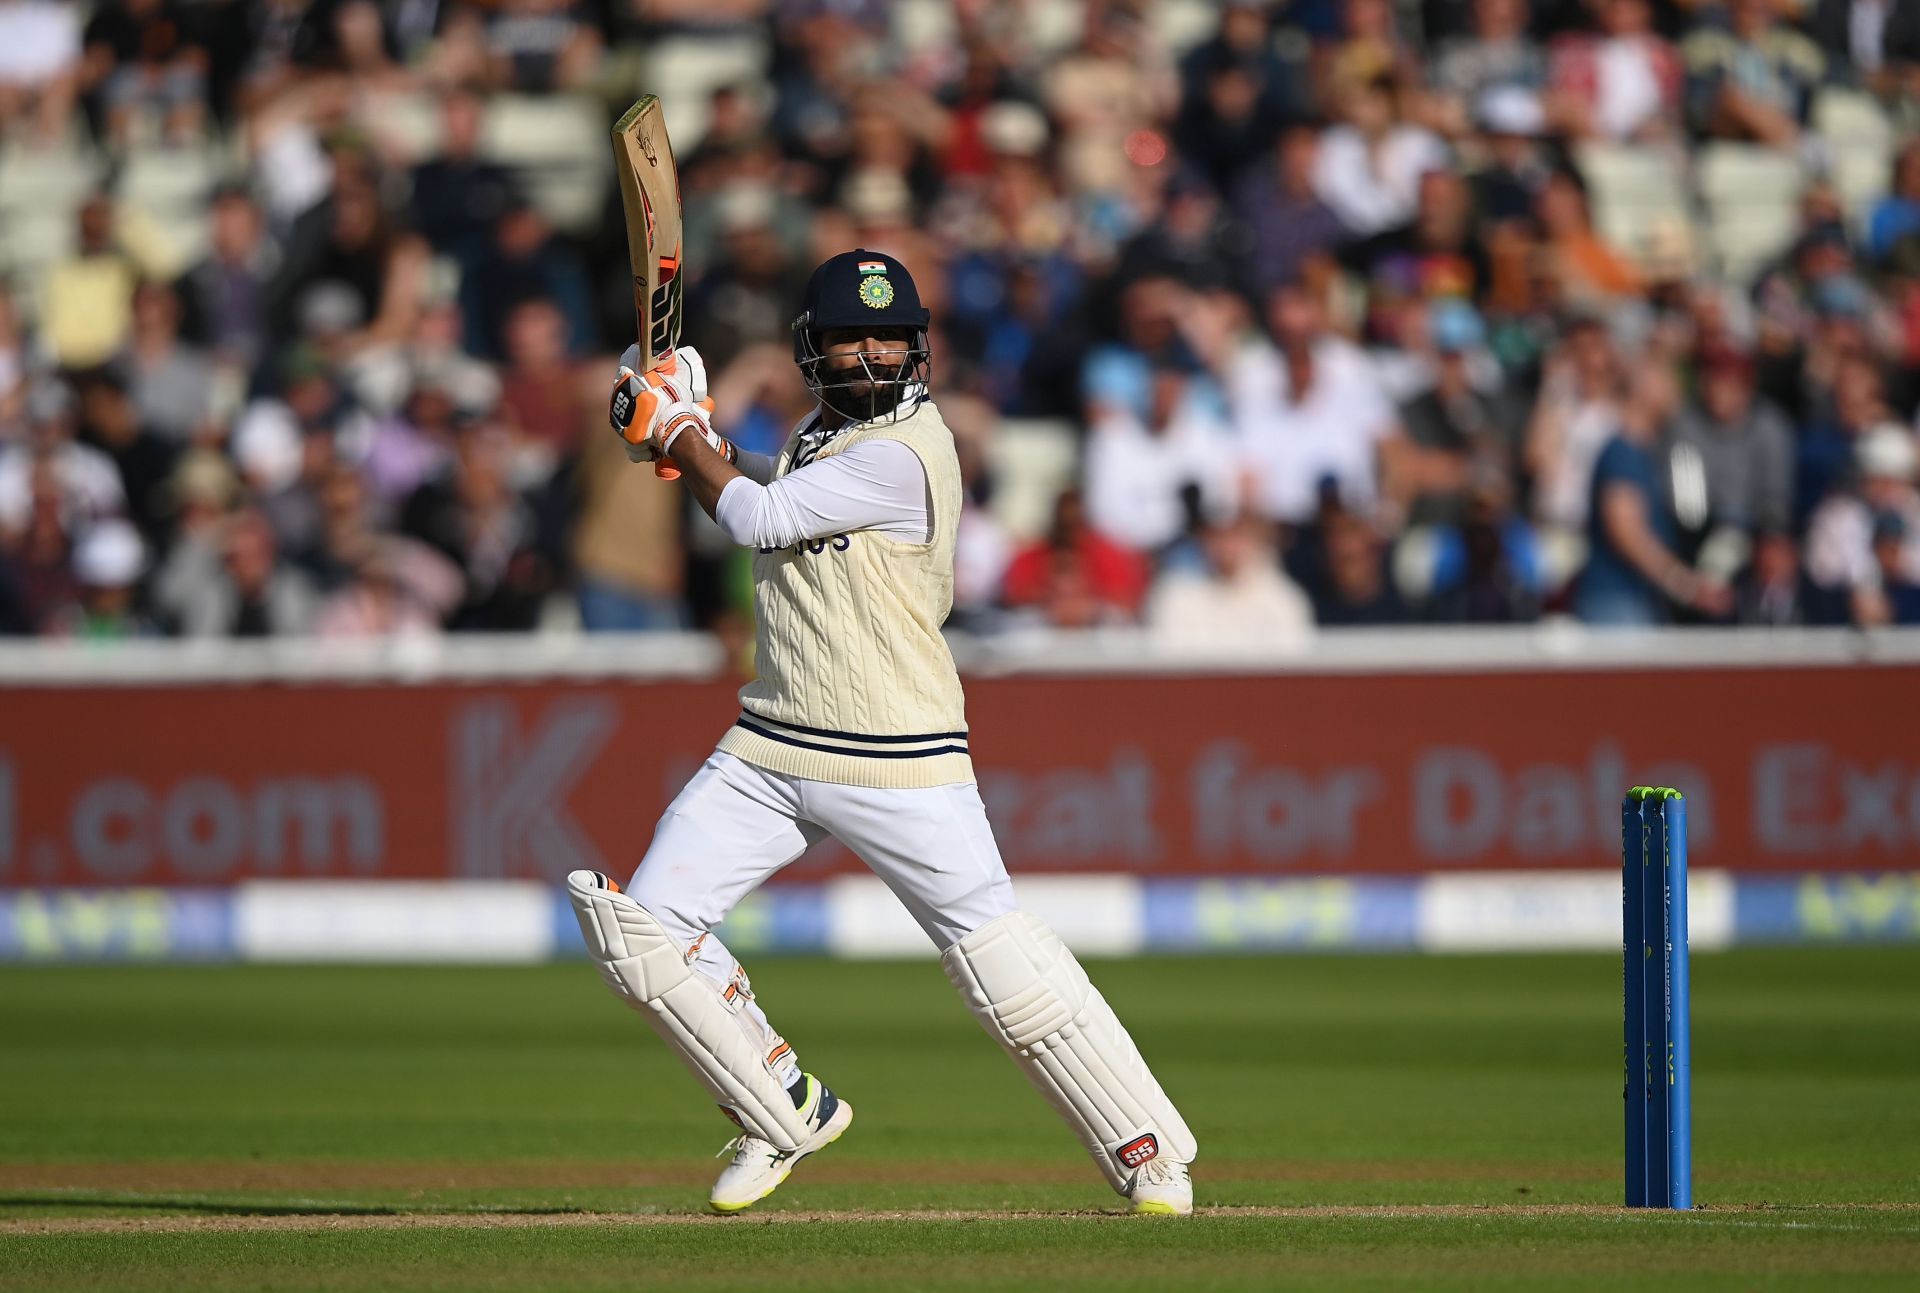 Ravindra Jadeja anchored the Indian innings on Day 1 of the Birmingham Test. Pic: Getty Images